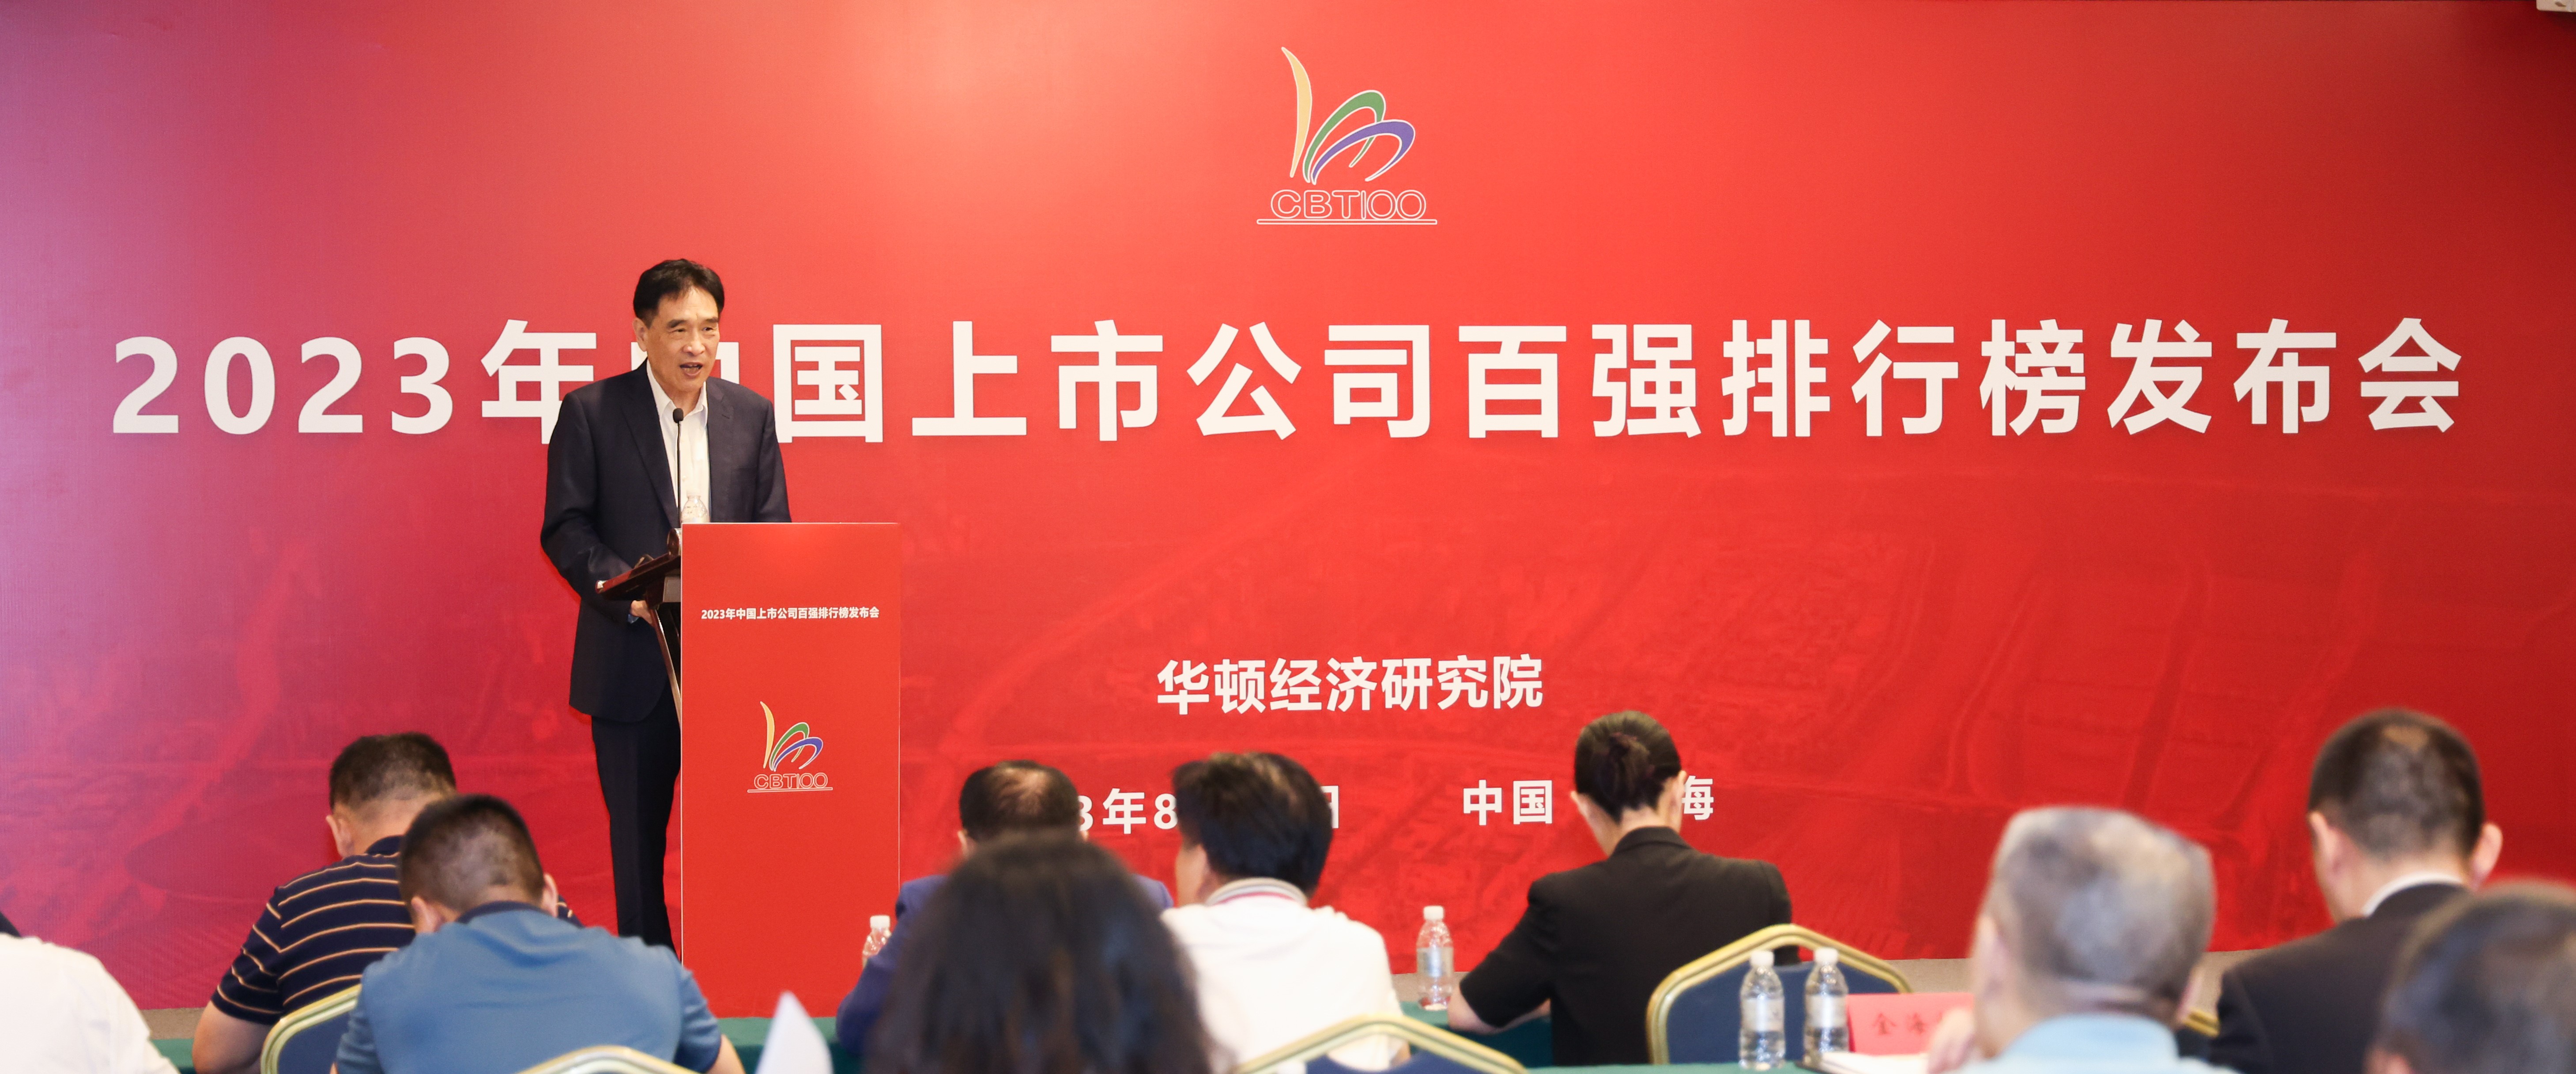 China Business Top 500 Enterprise 2023 Released in Shanghai